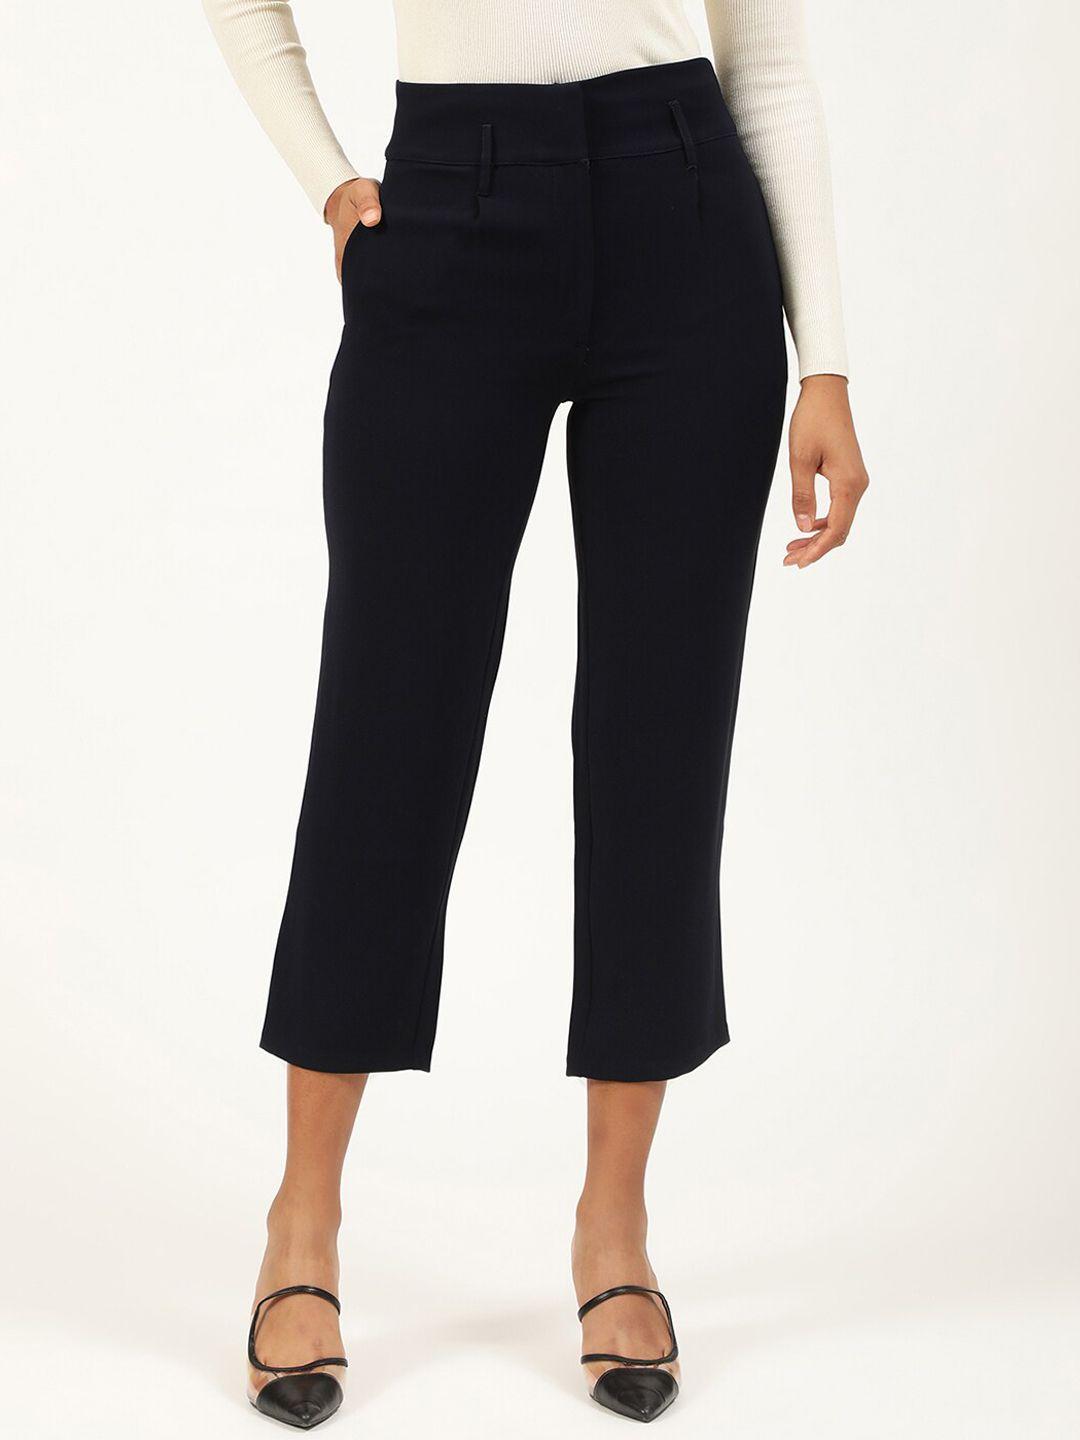 centrestage women navy blue straight fit culottes trousers